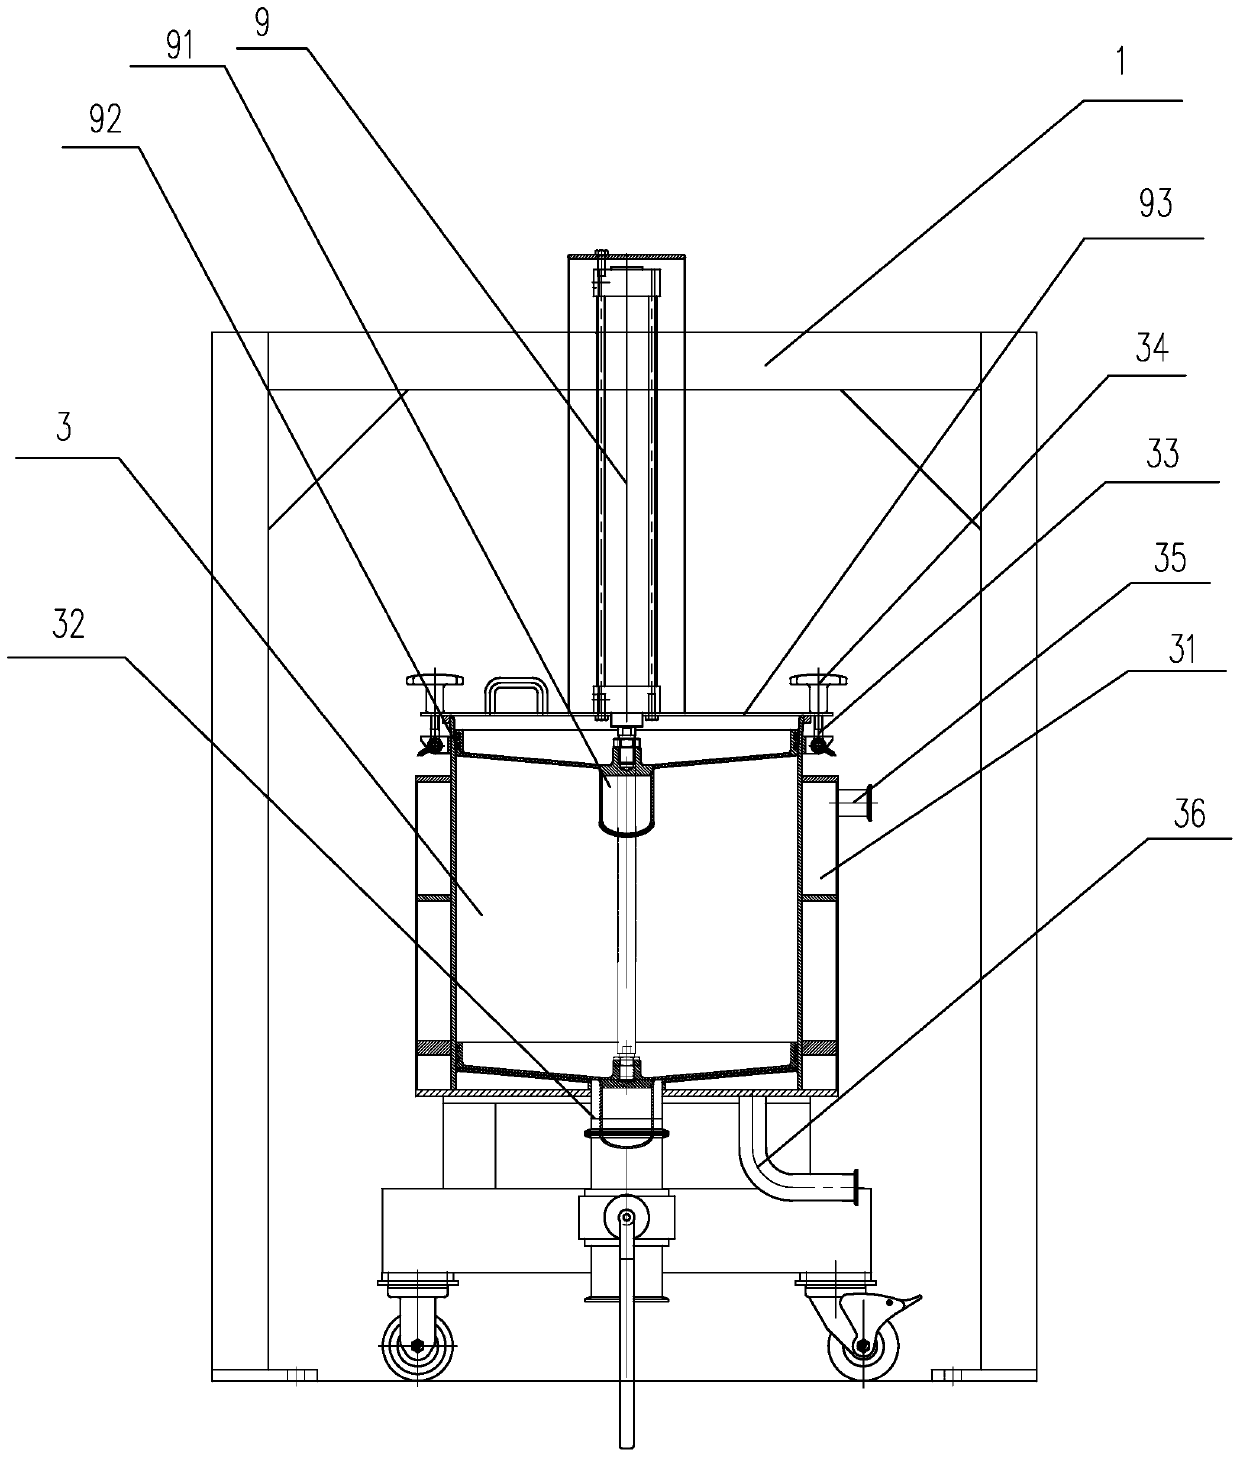 Pulp mixing device